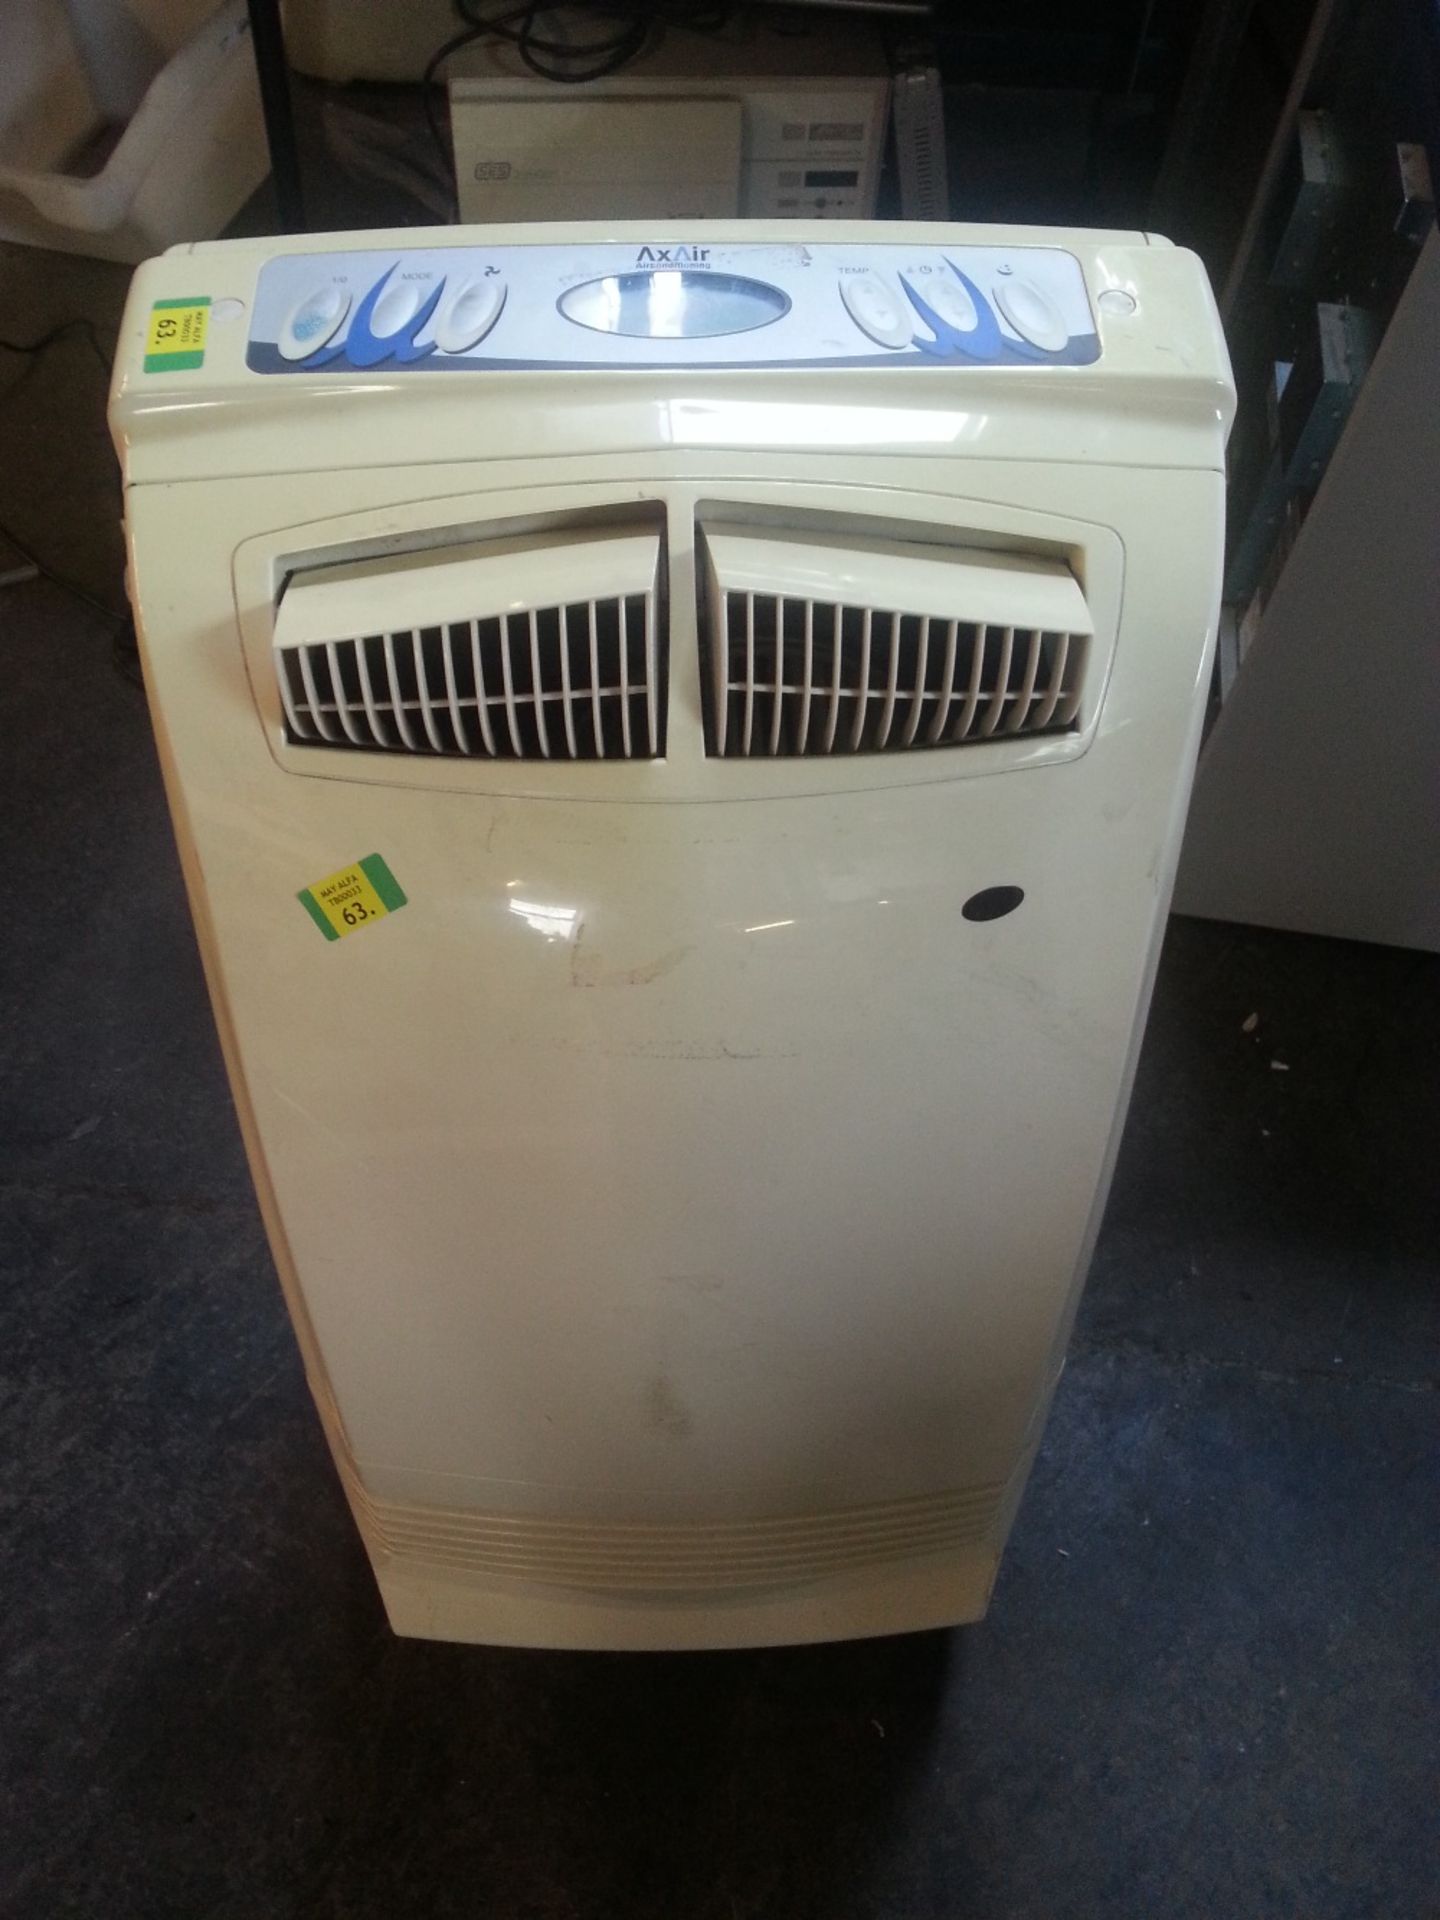 AXAIR Gam-12 Mobile Air Conditioner - Powers On Blows Cold Air